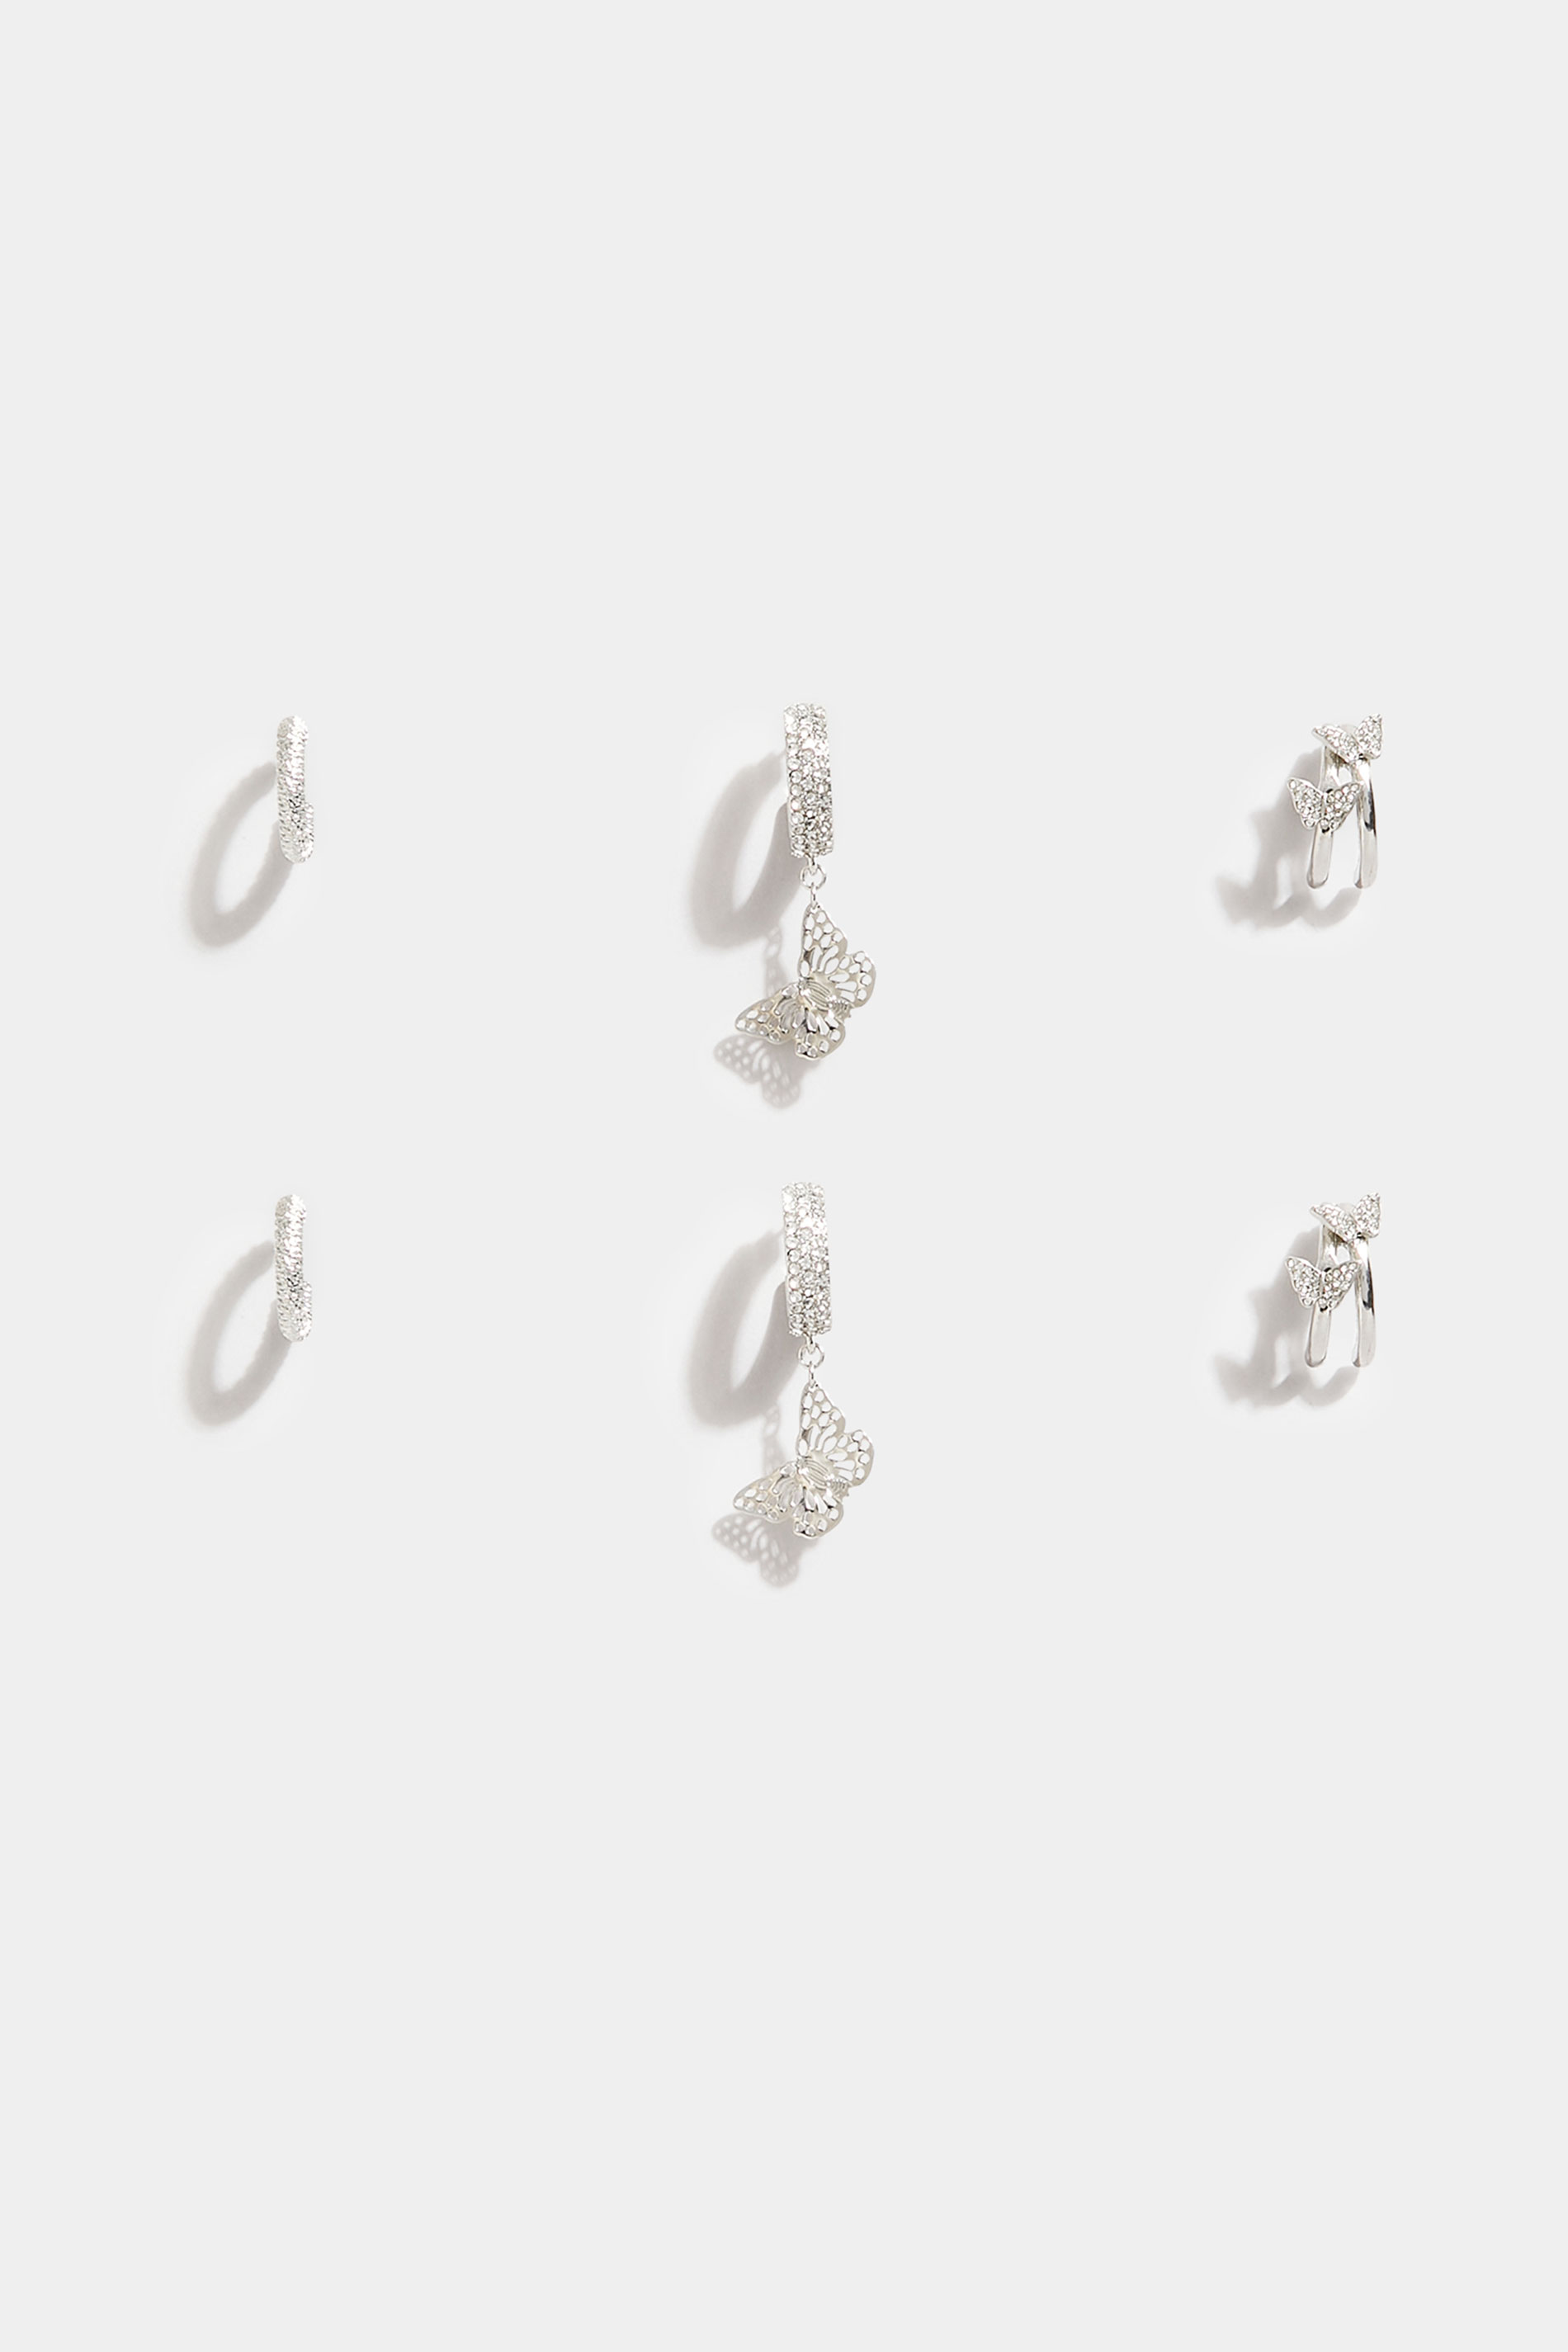 3 PACK Silver Diamante Butterfly Earrings | Yours Clothing  3